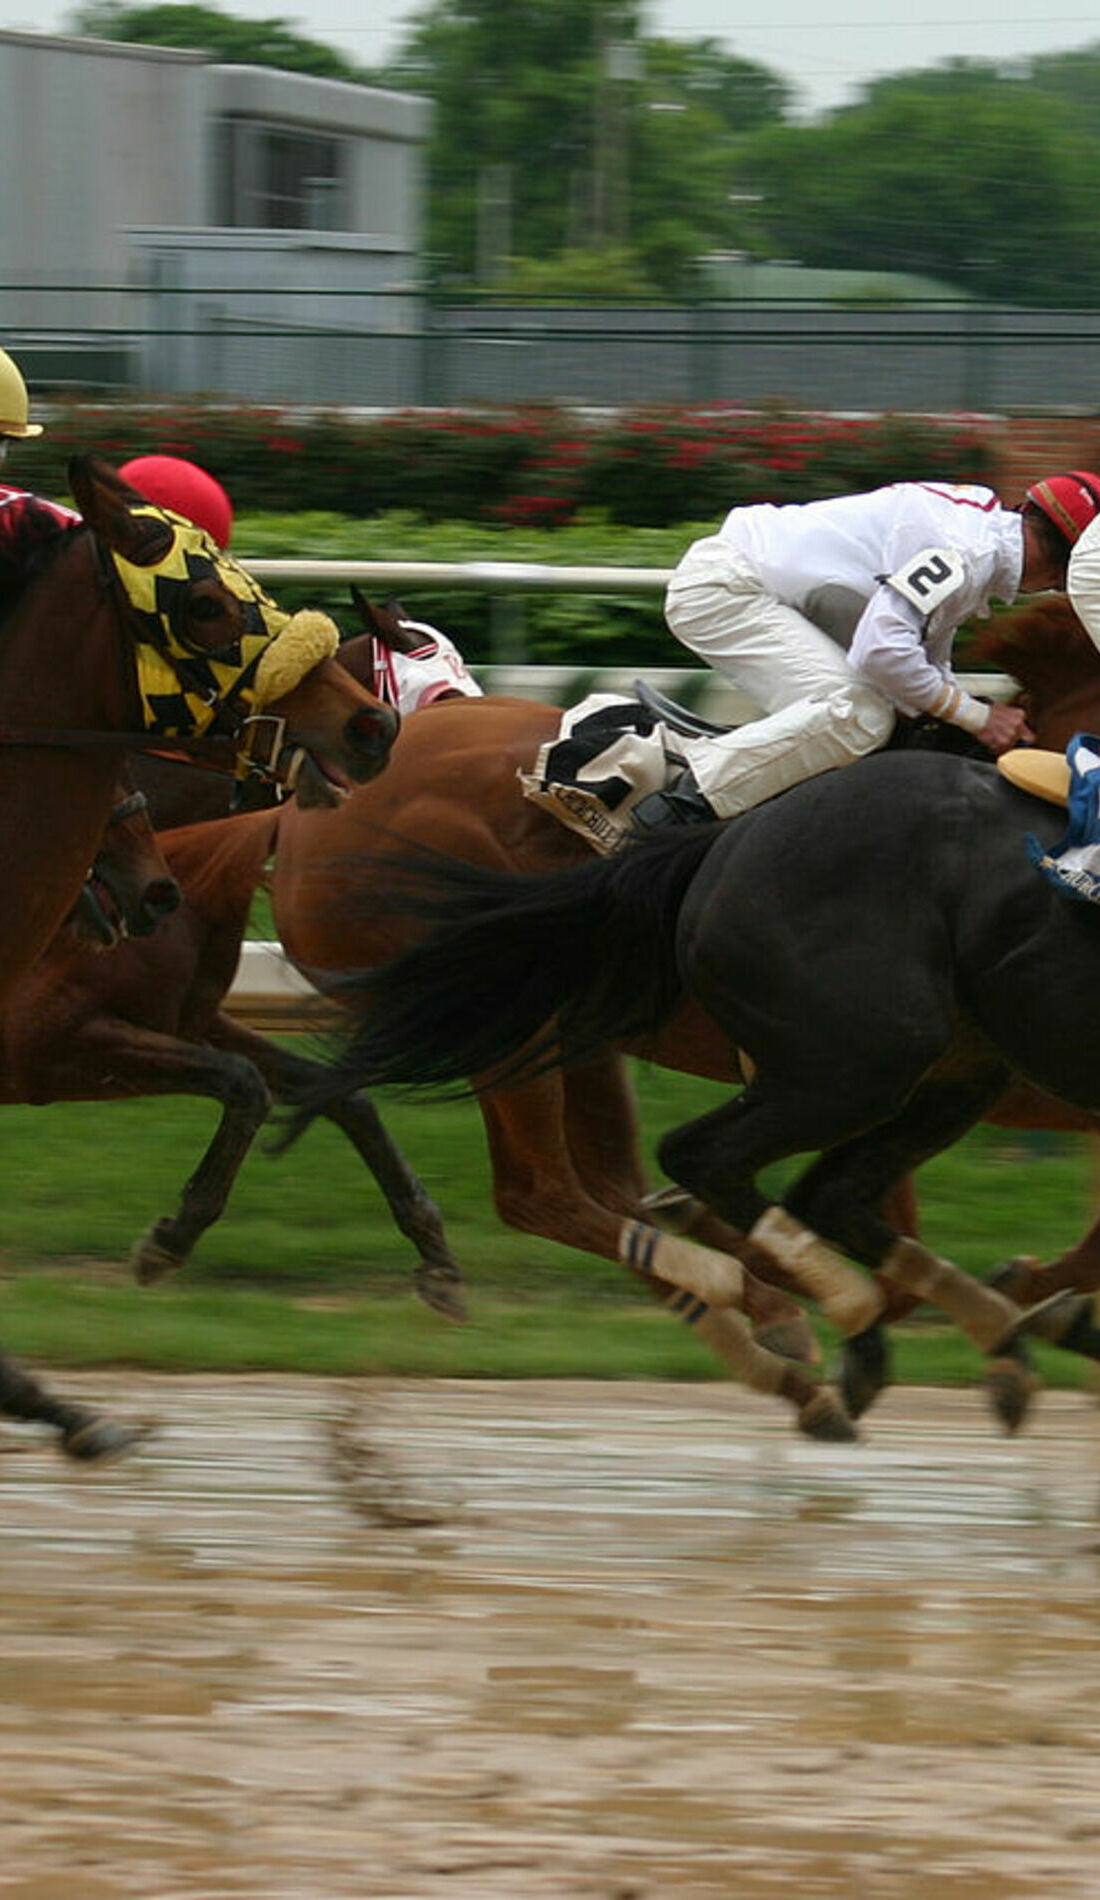 A Churchill Downs Spring Racing live event